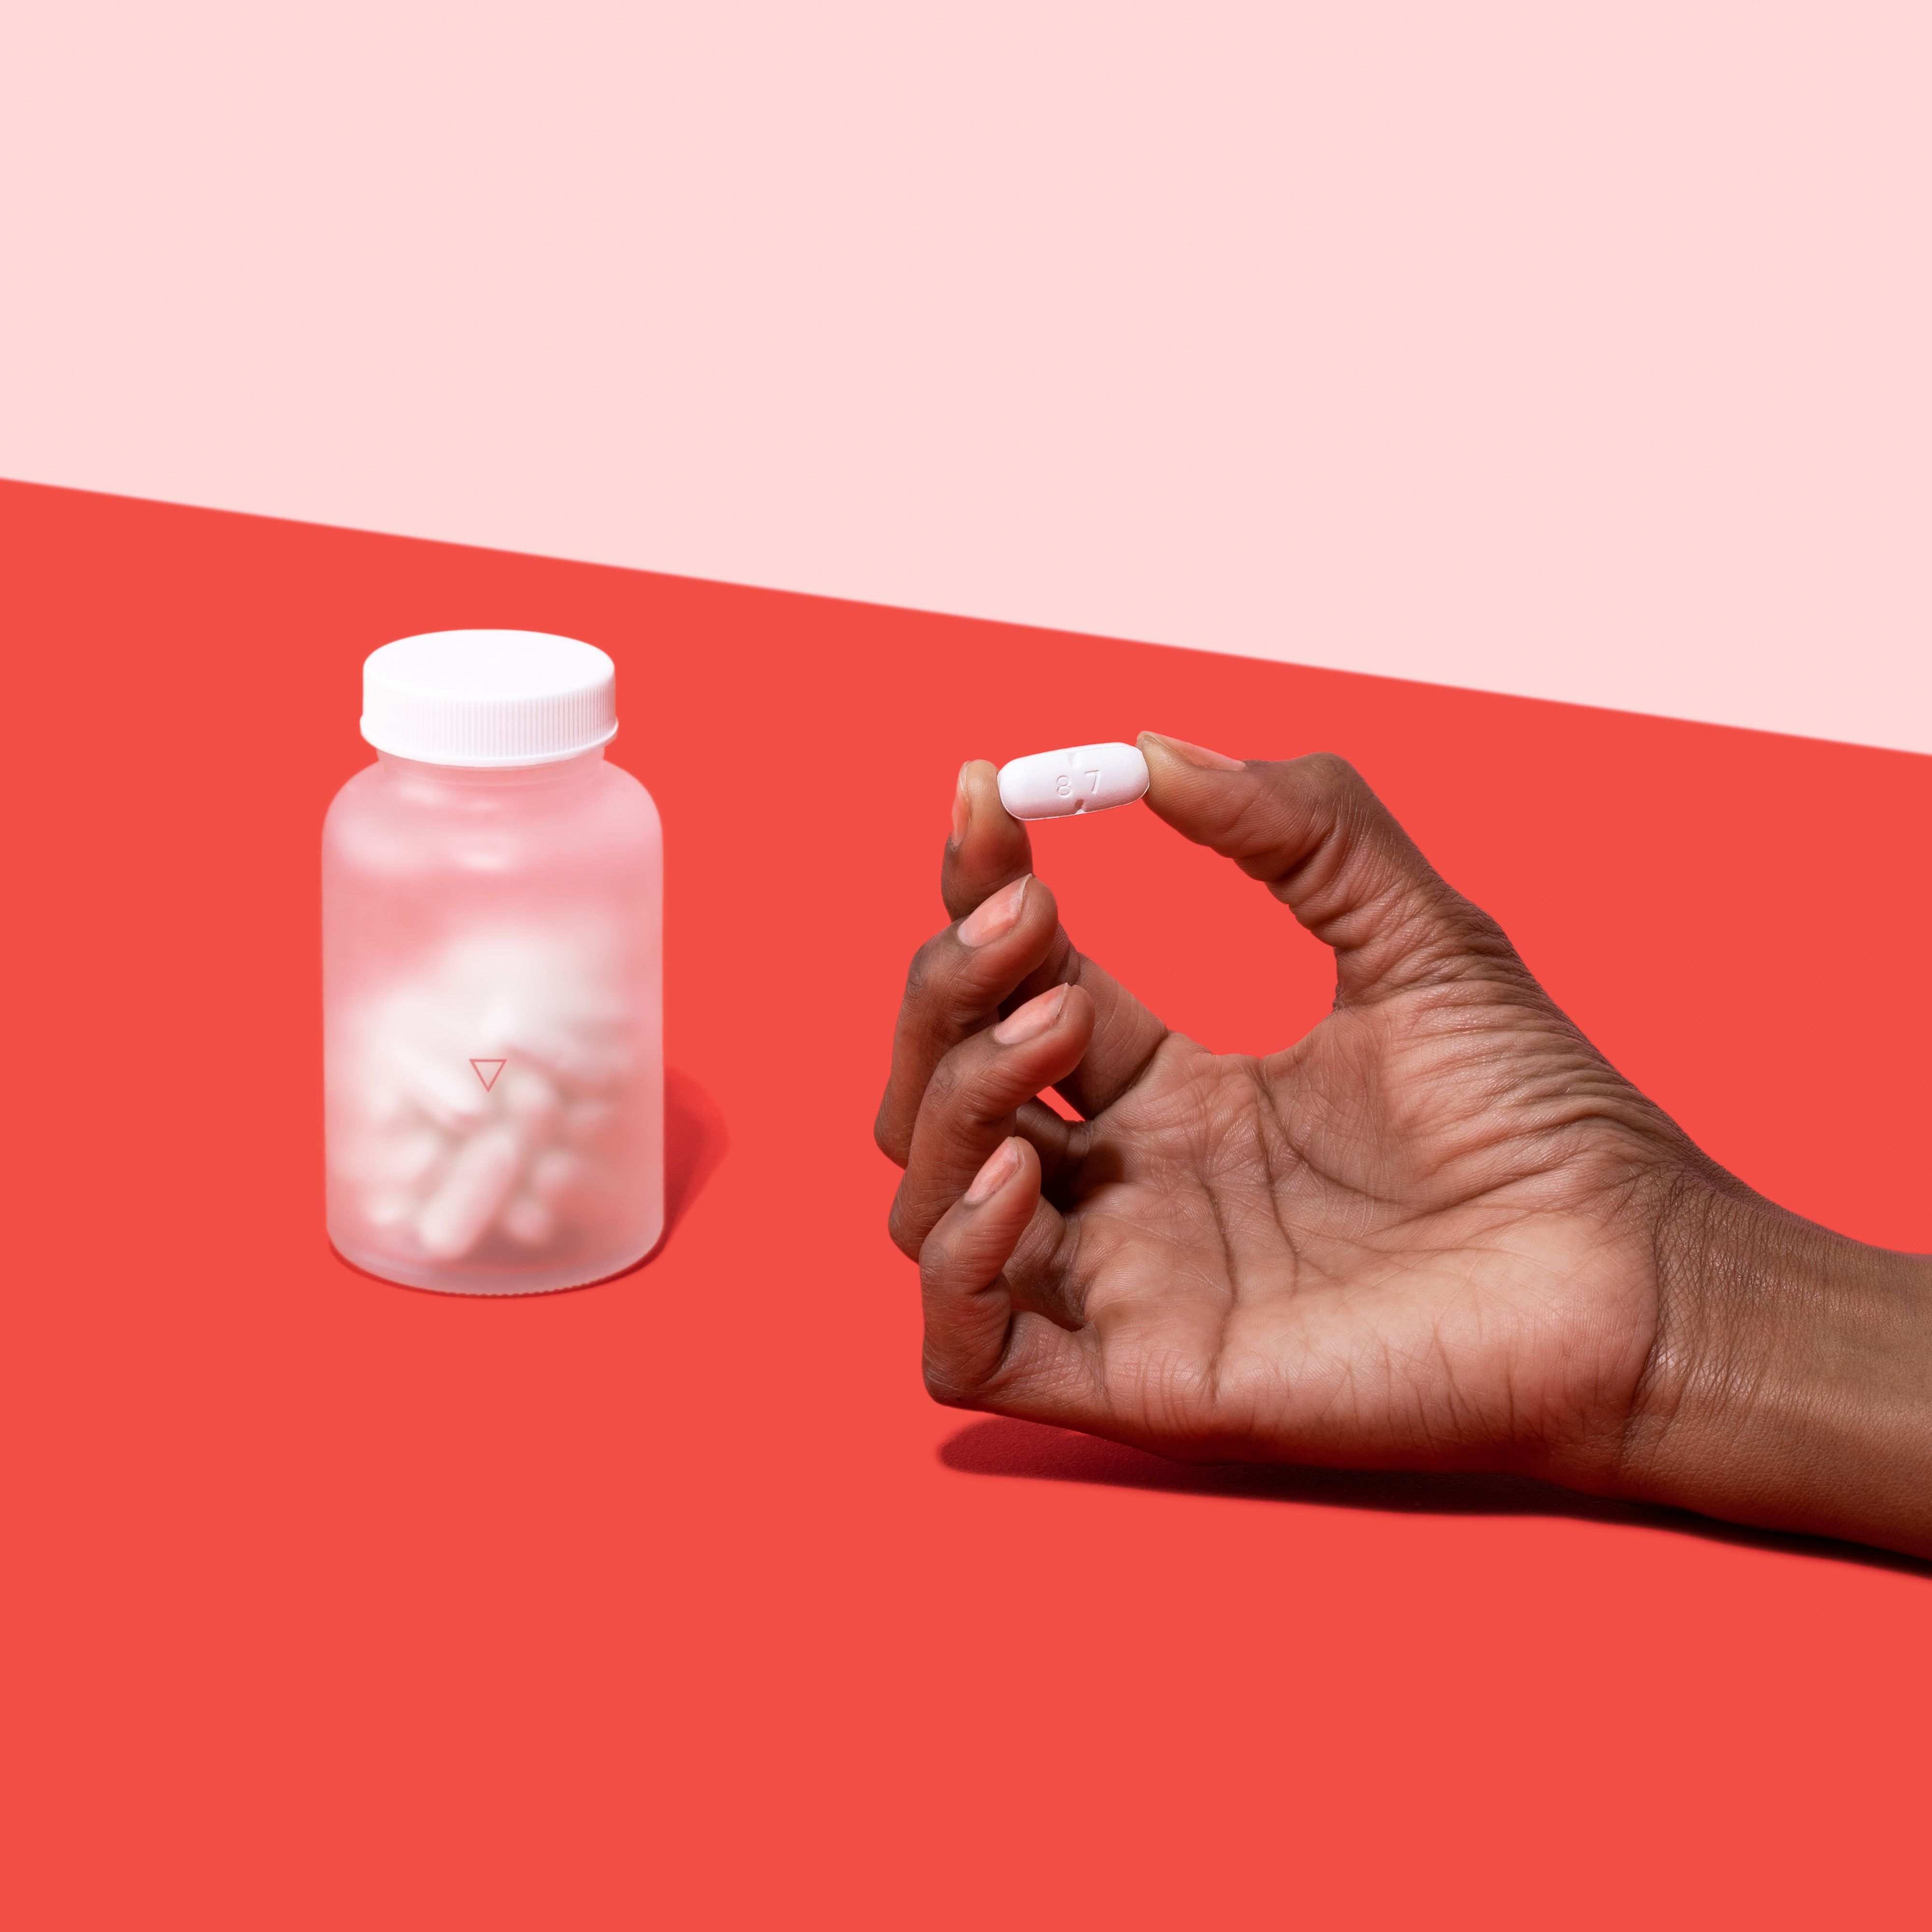 Hand holding pill next to jar of oral acyclovir on red surface, on pink background